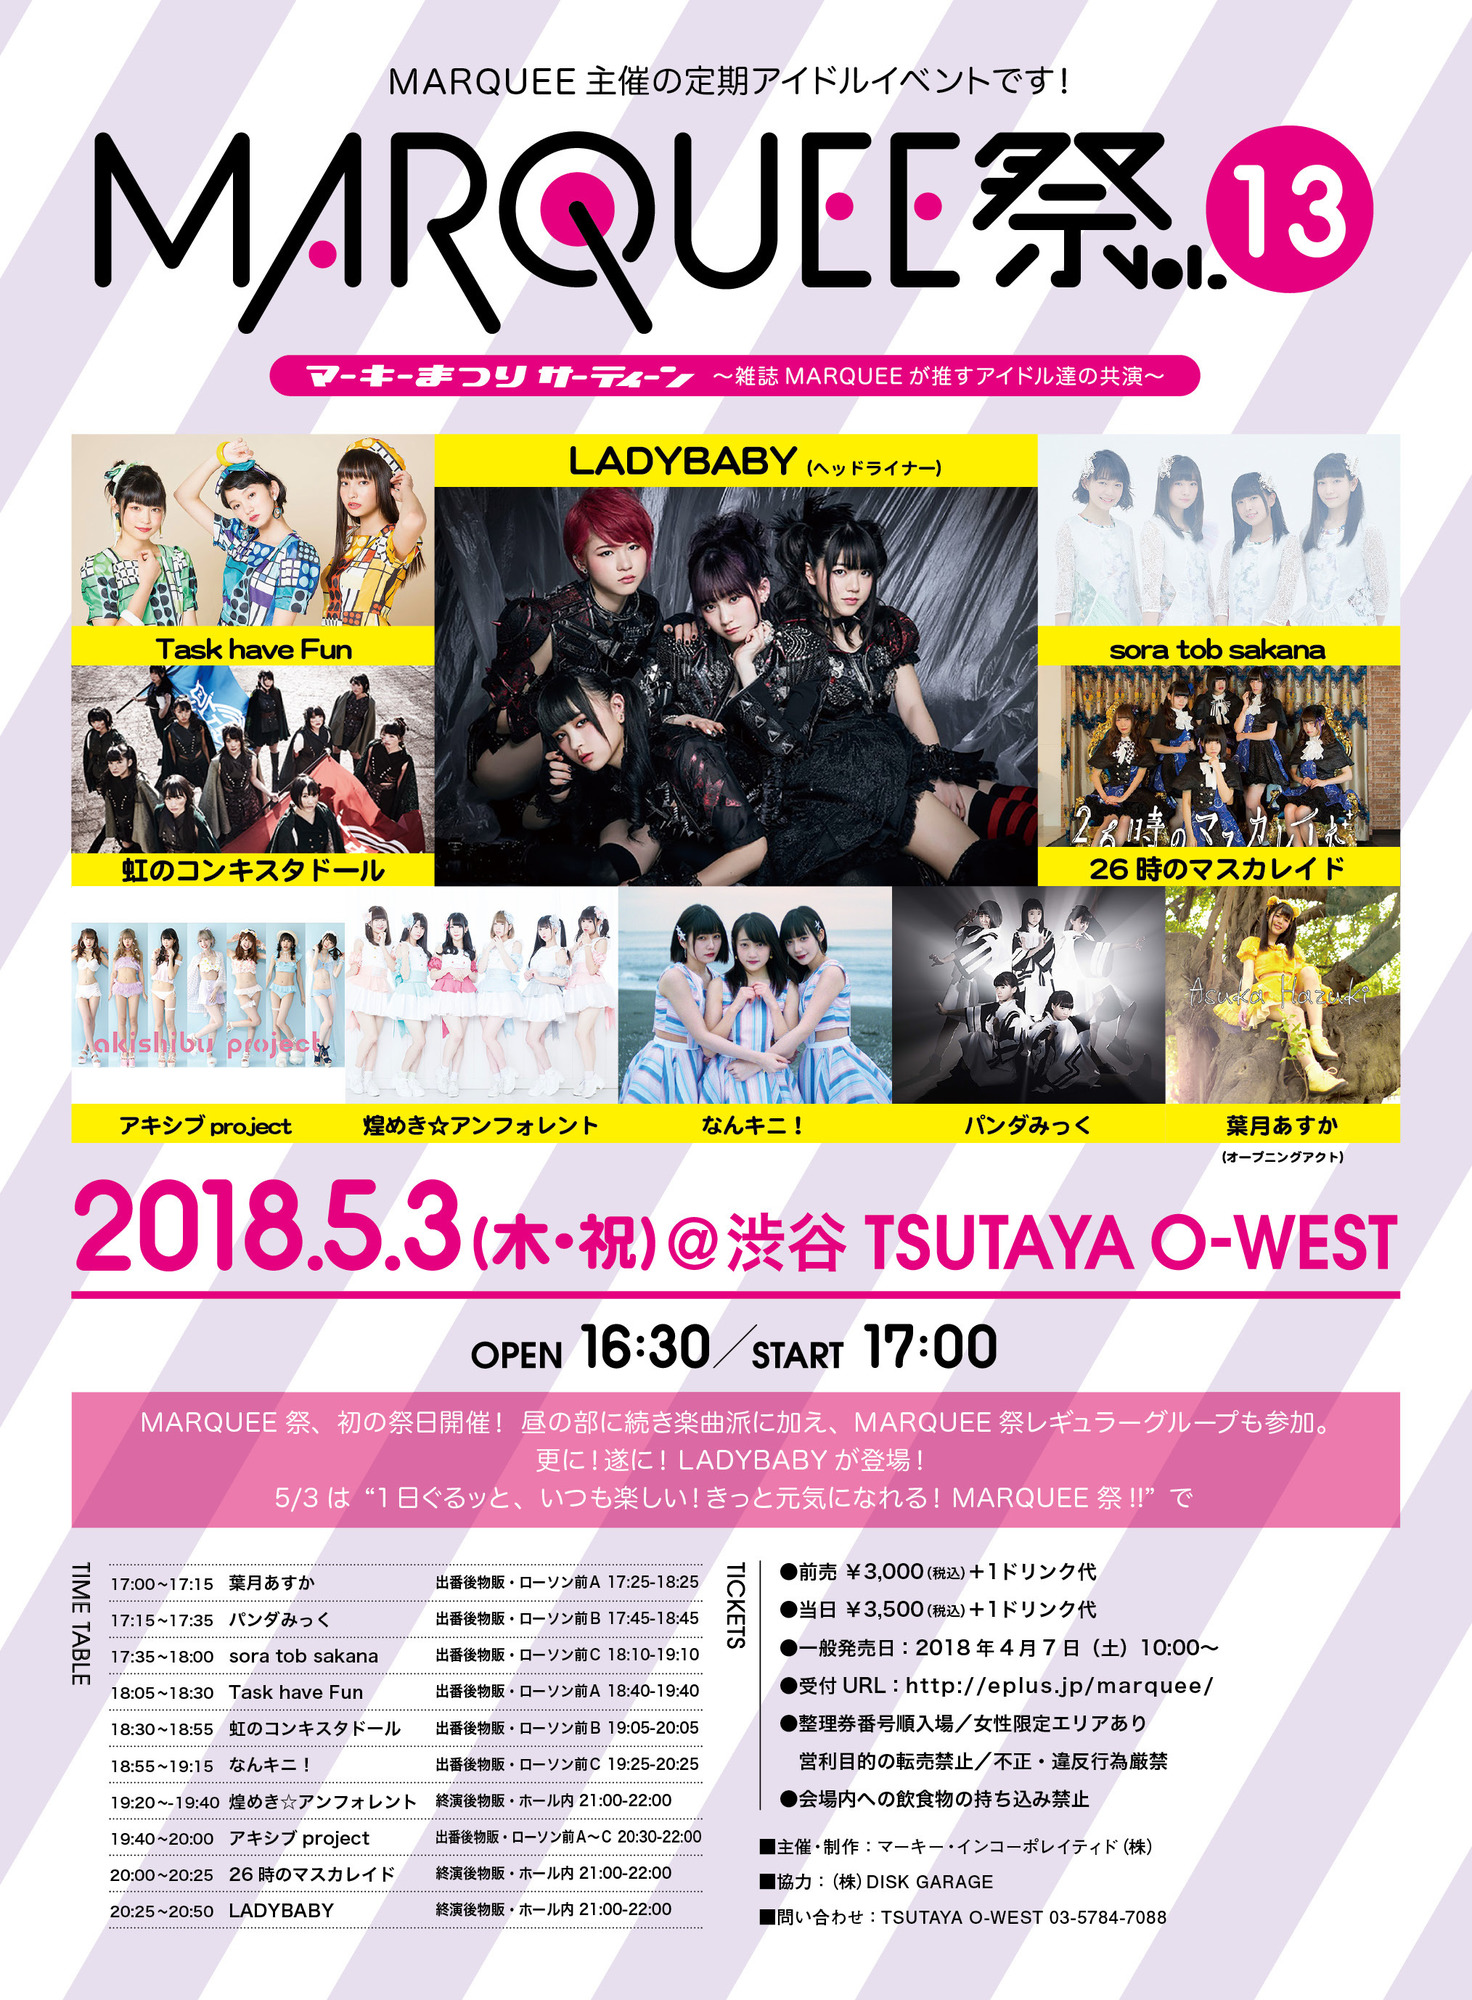 2018/5/3：MARQUEE祭 Vol.13 ＠O-WEST | Task have Fun Official Site